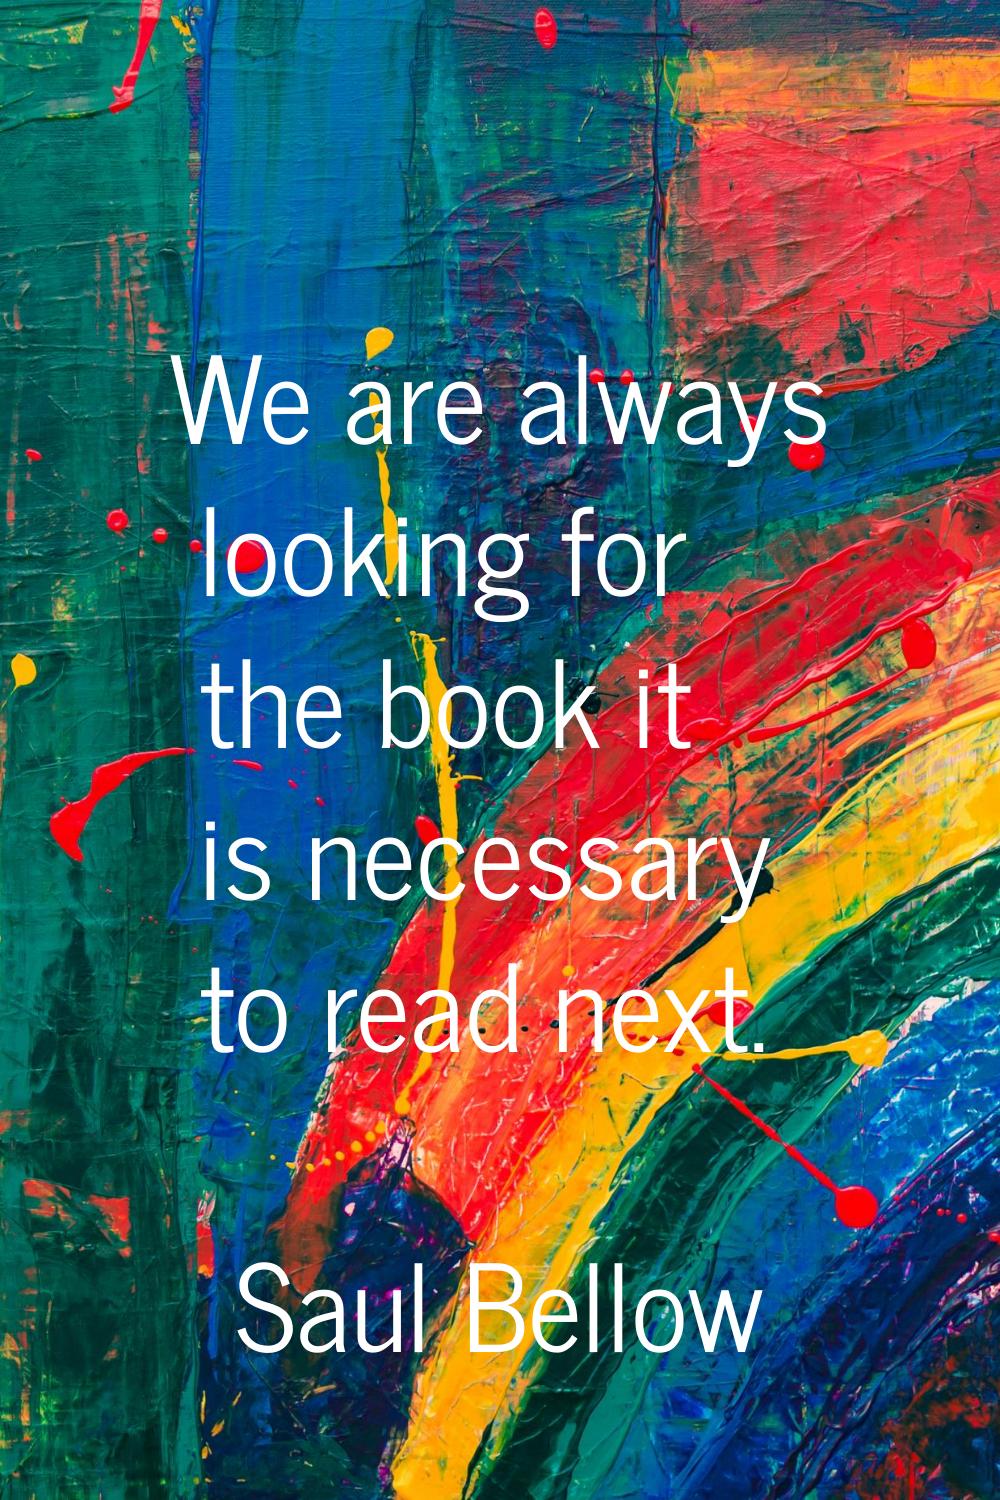 We are always looking for the book it is necessary to read next.